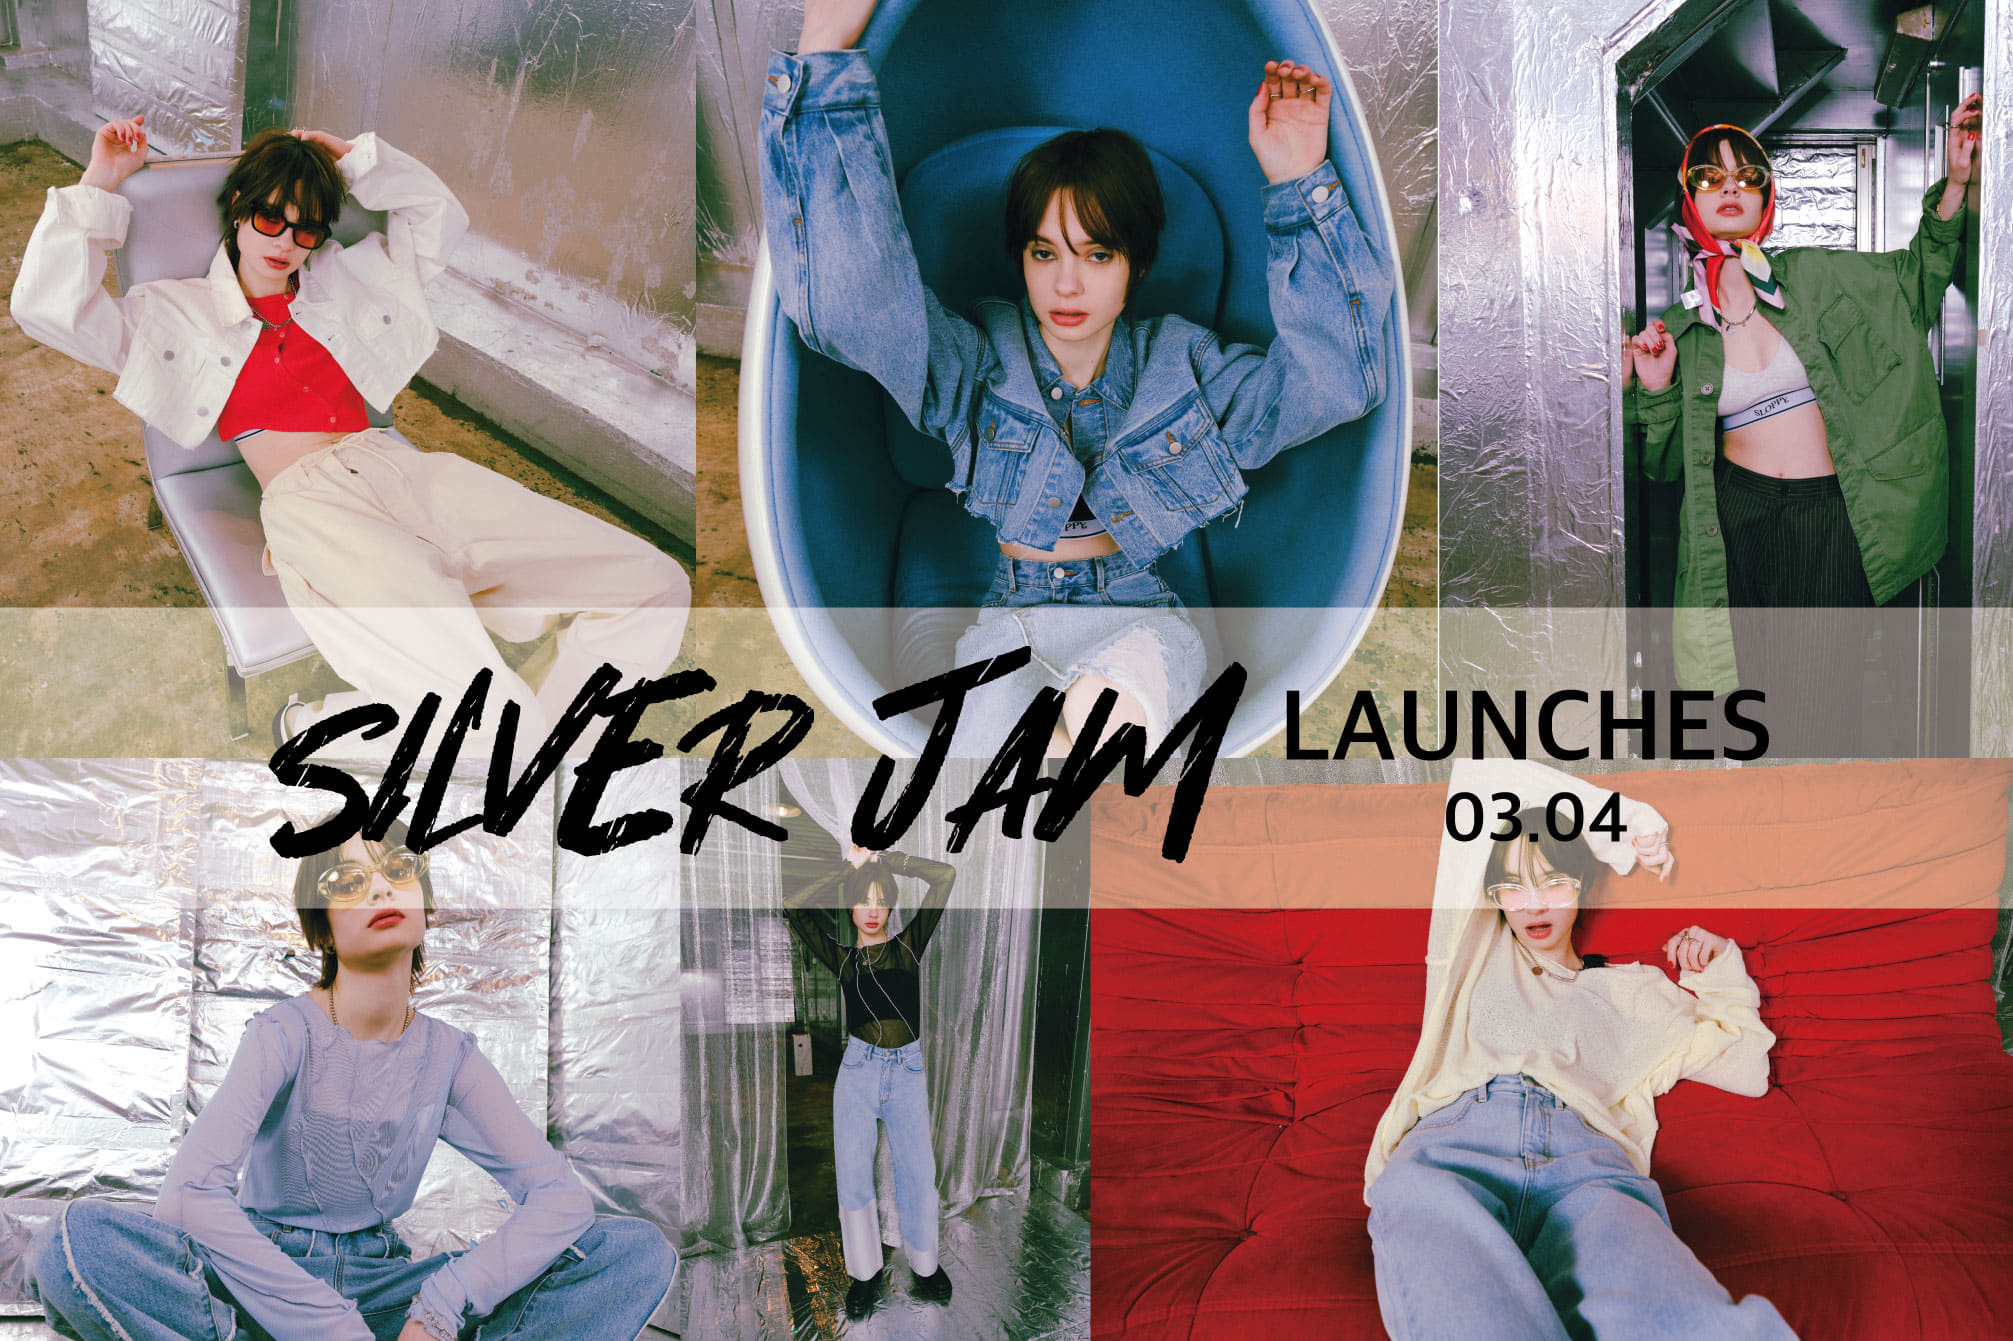 WHO’S WHO gallery 【SILVER JAM】LAUNCHES!